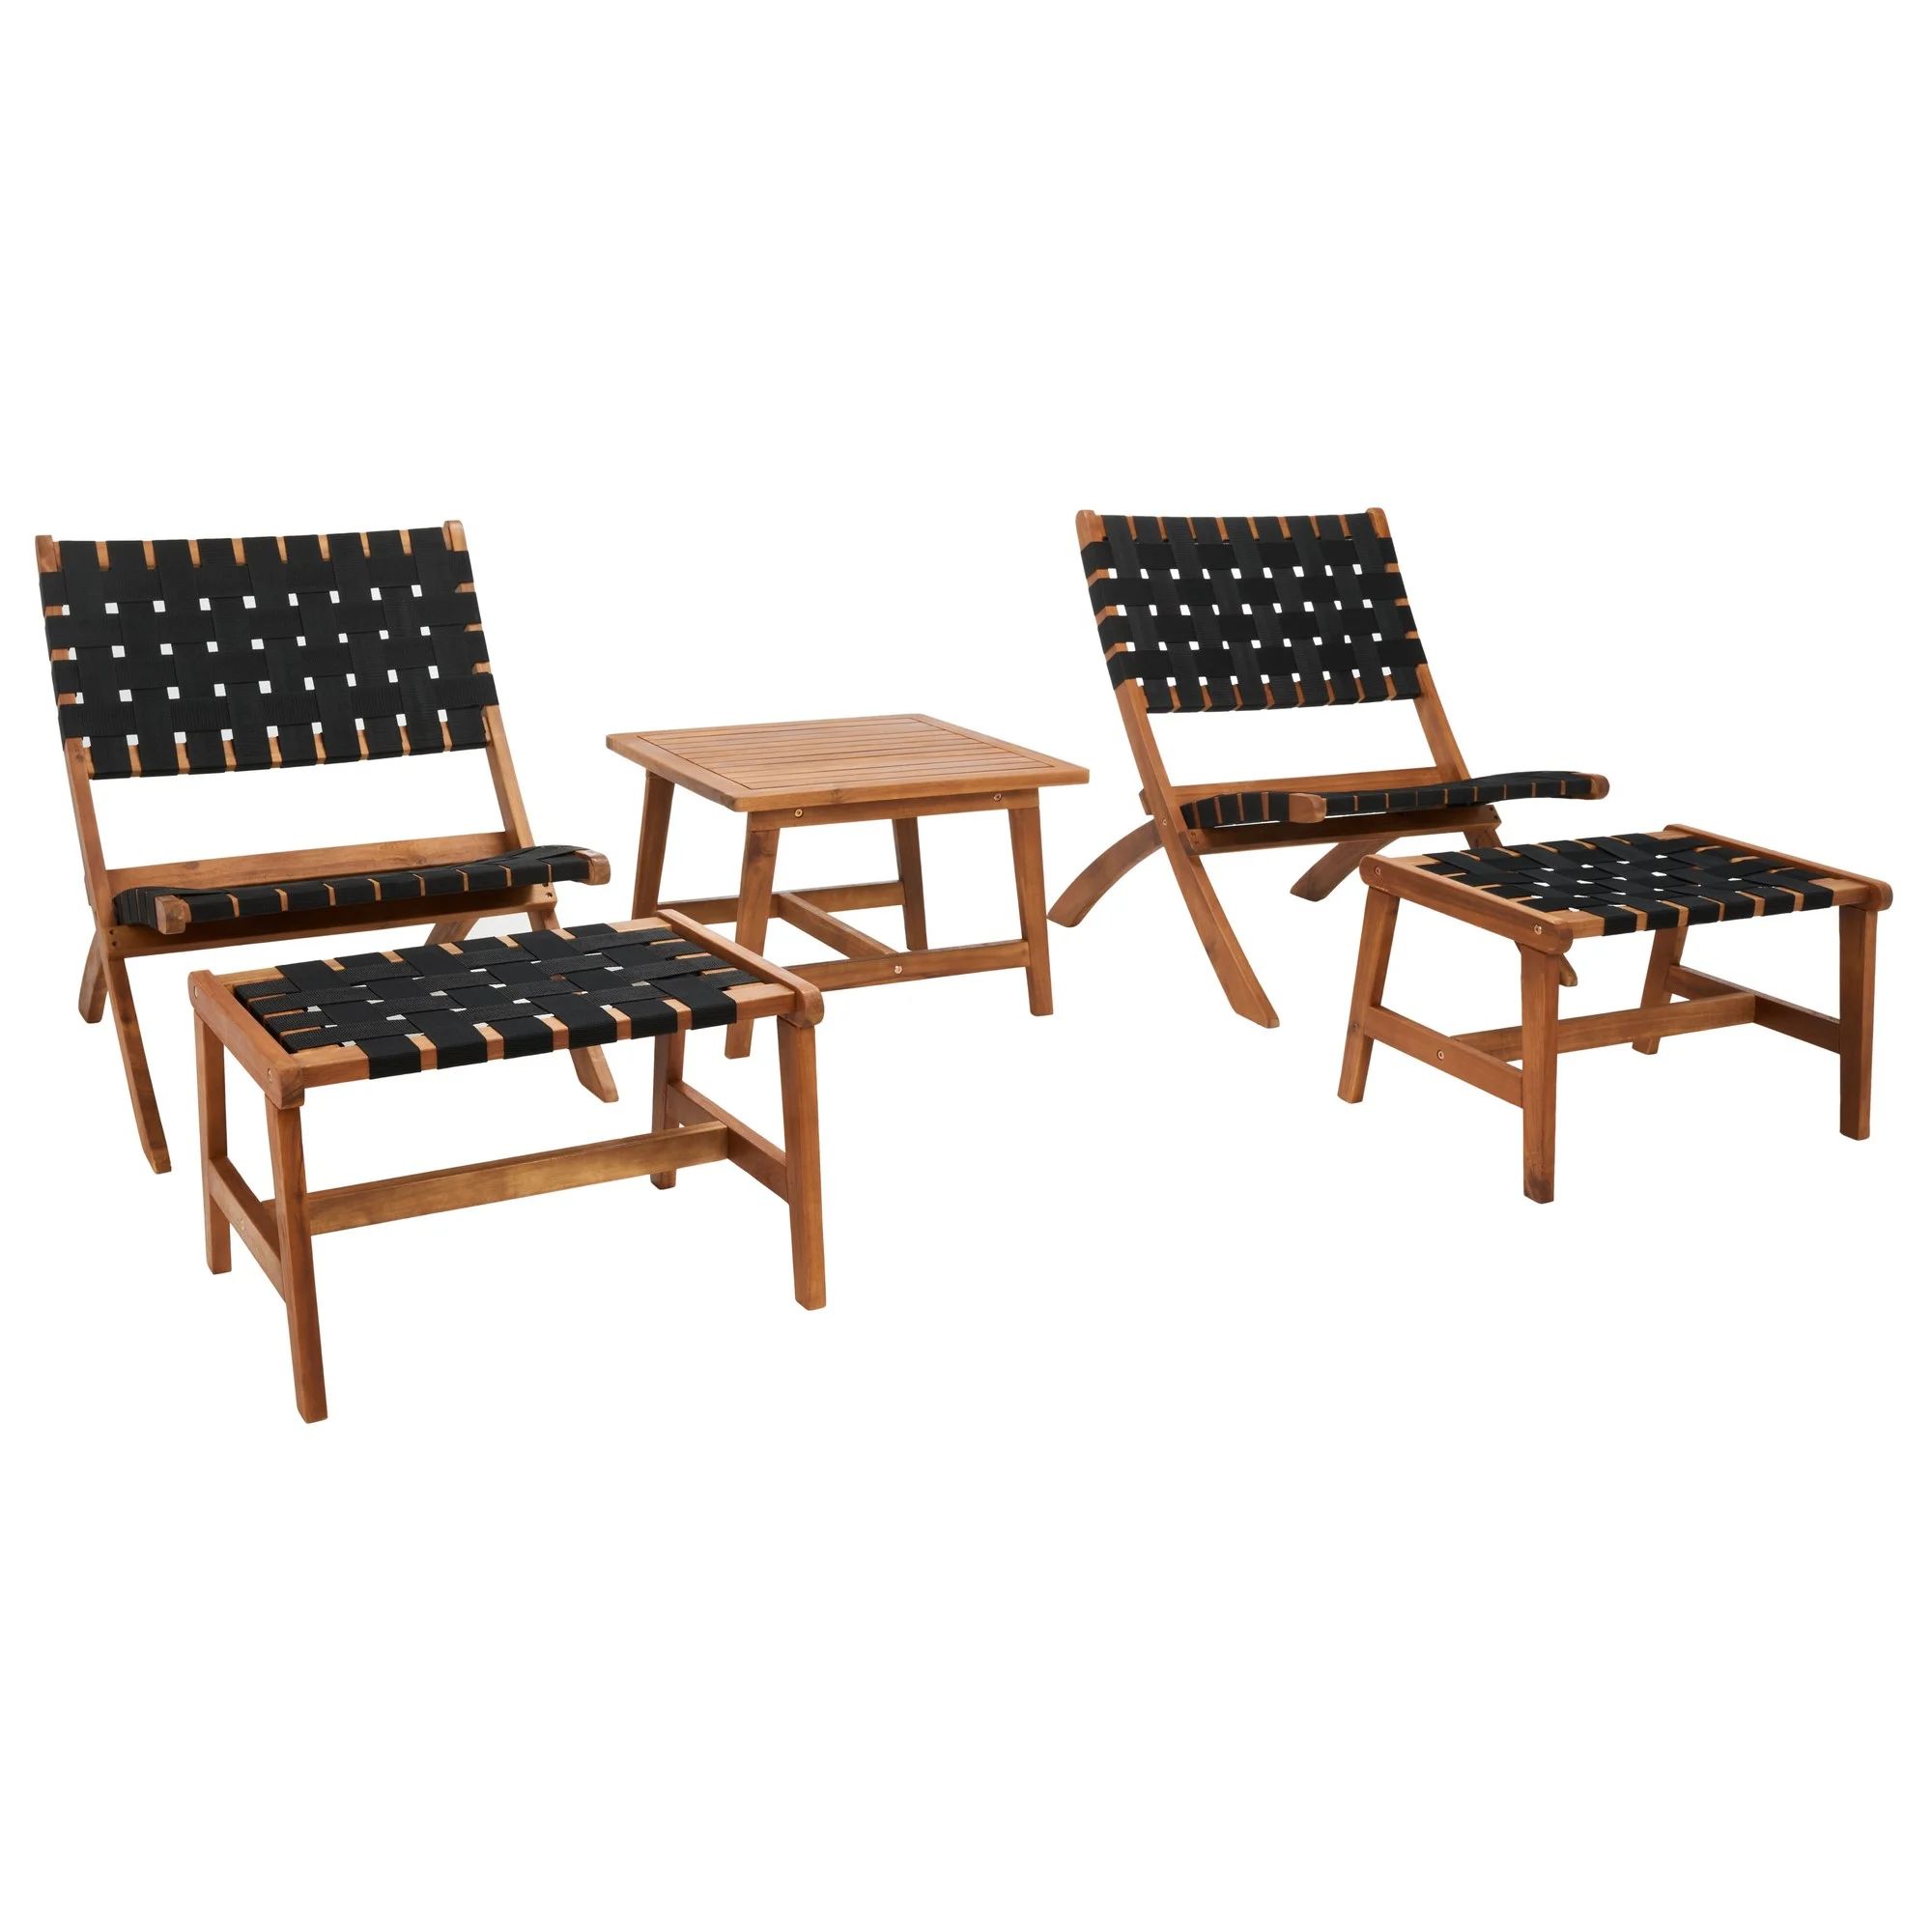 Bosch Solid Wood 2 - Person Seating Group with Cushions | Wayfair North America